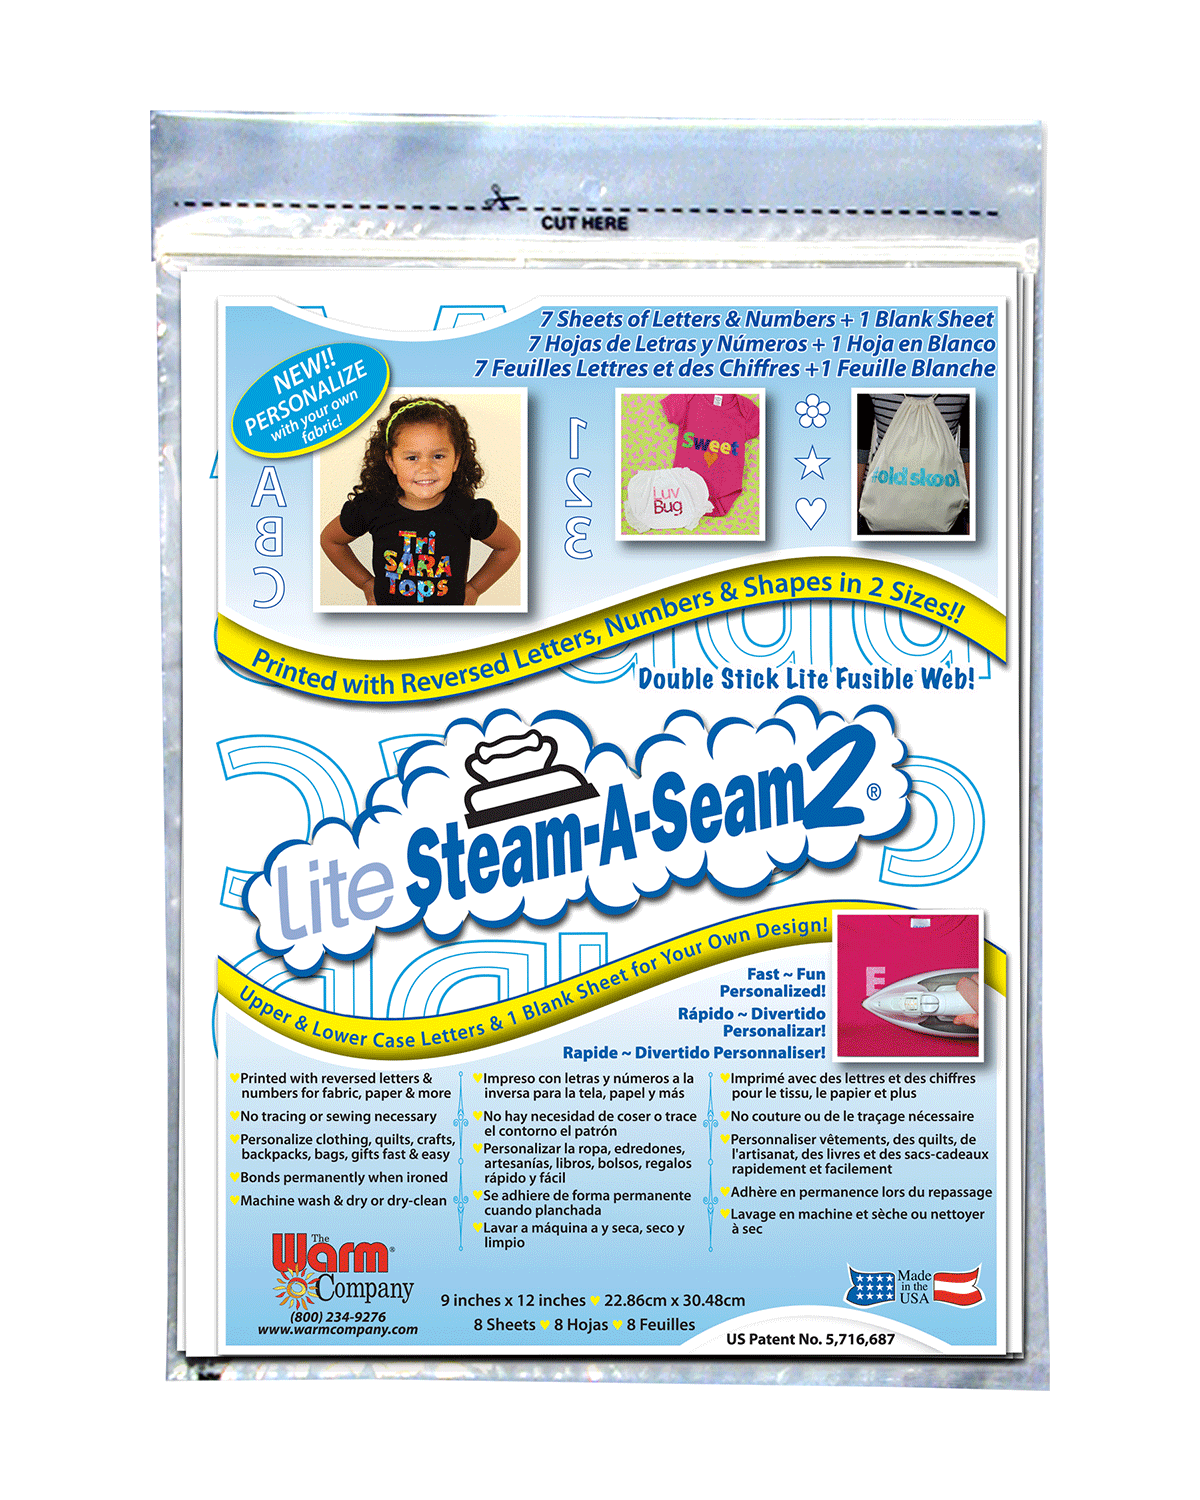 Warm Company 3-Pack Lite Steam A Seam 2 Double Stick Fusible Web 9 inch x 12 inch Sheets 5 Pack 5417 